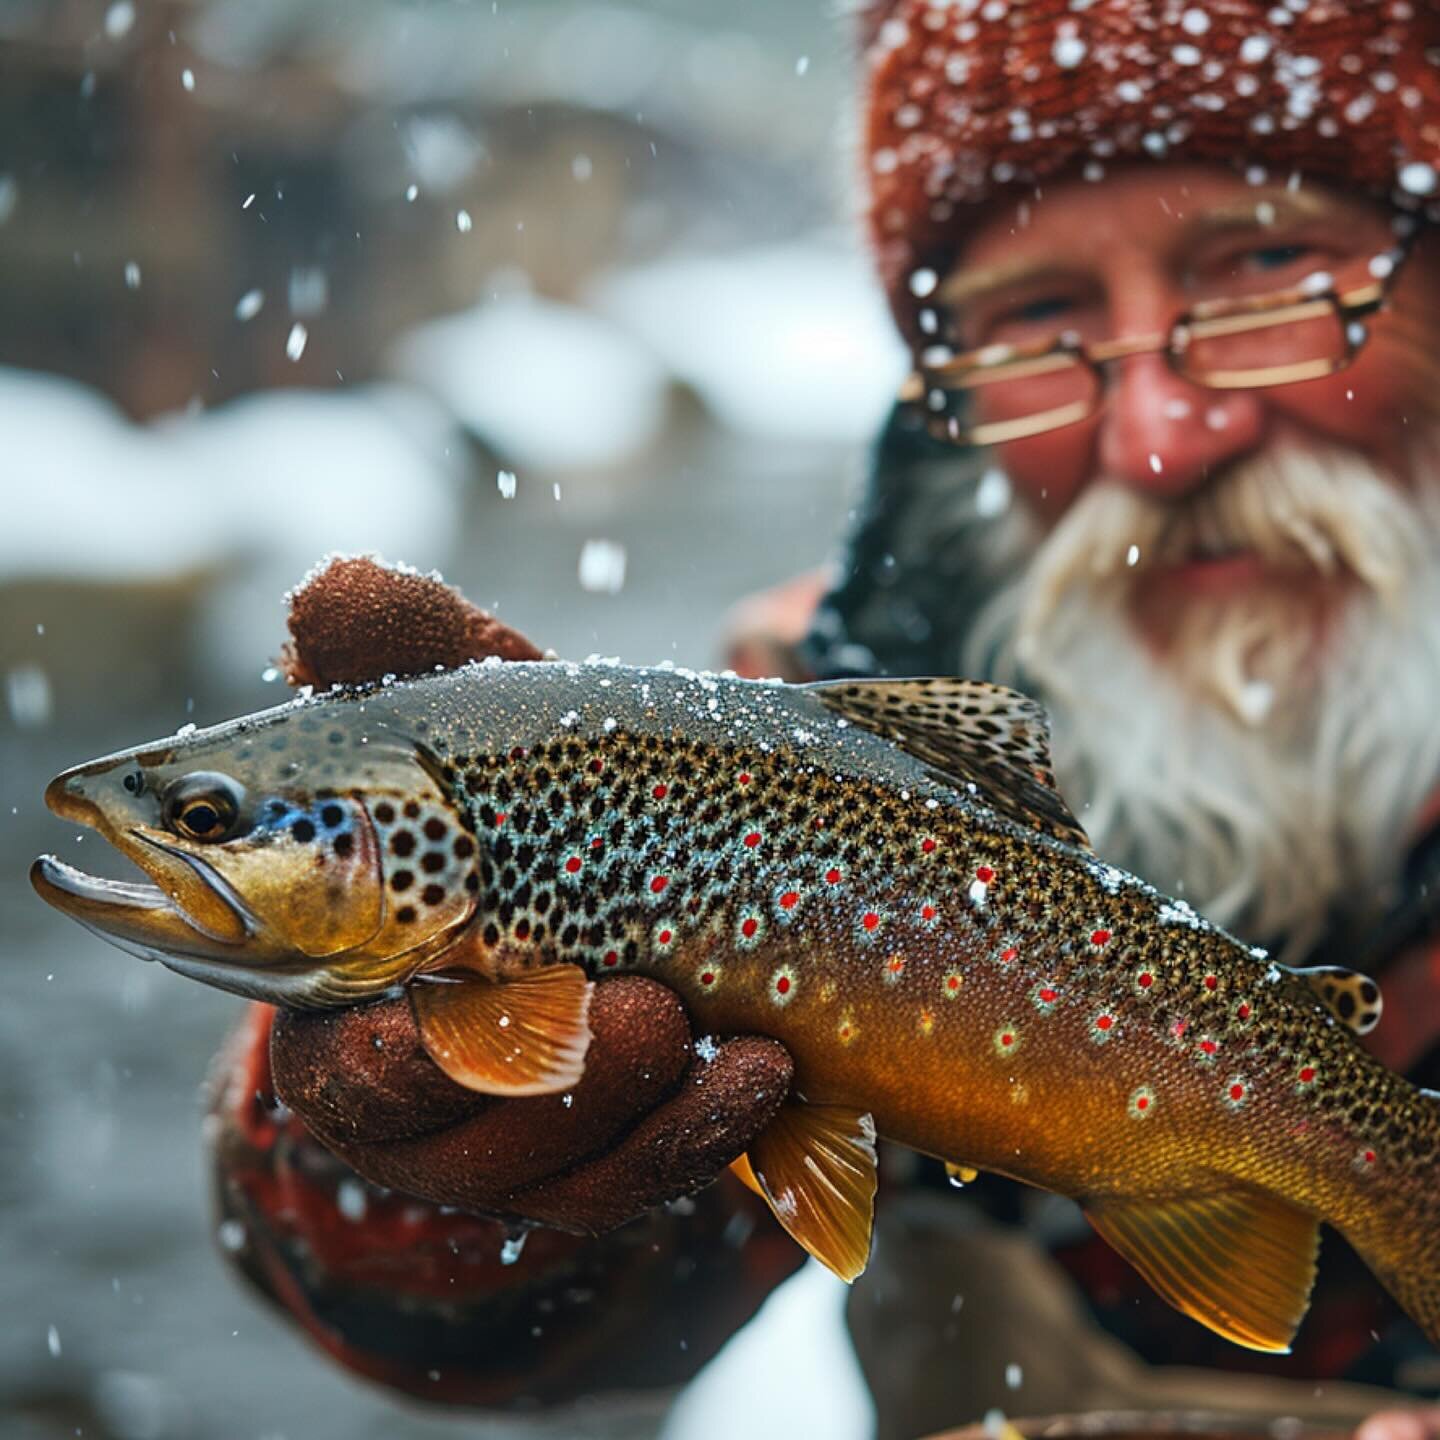 Merry Christmas, y&rsquo;all!🎄Guess who swung by for a quick dip in the river after all that hard work! It was a pleasure, Santa! Catch ya next year! 🎣

Shared these images on my personal account yesterday&hellip;👉@coloradic. It seems I successful